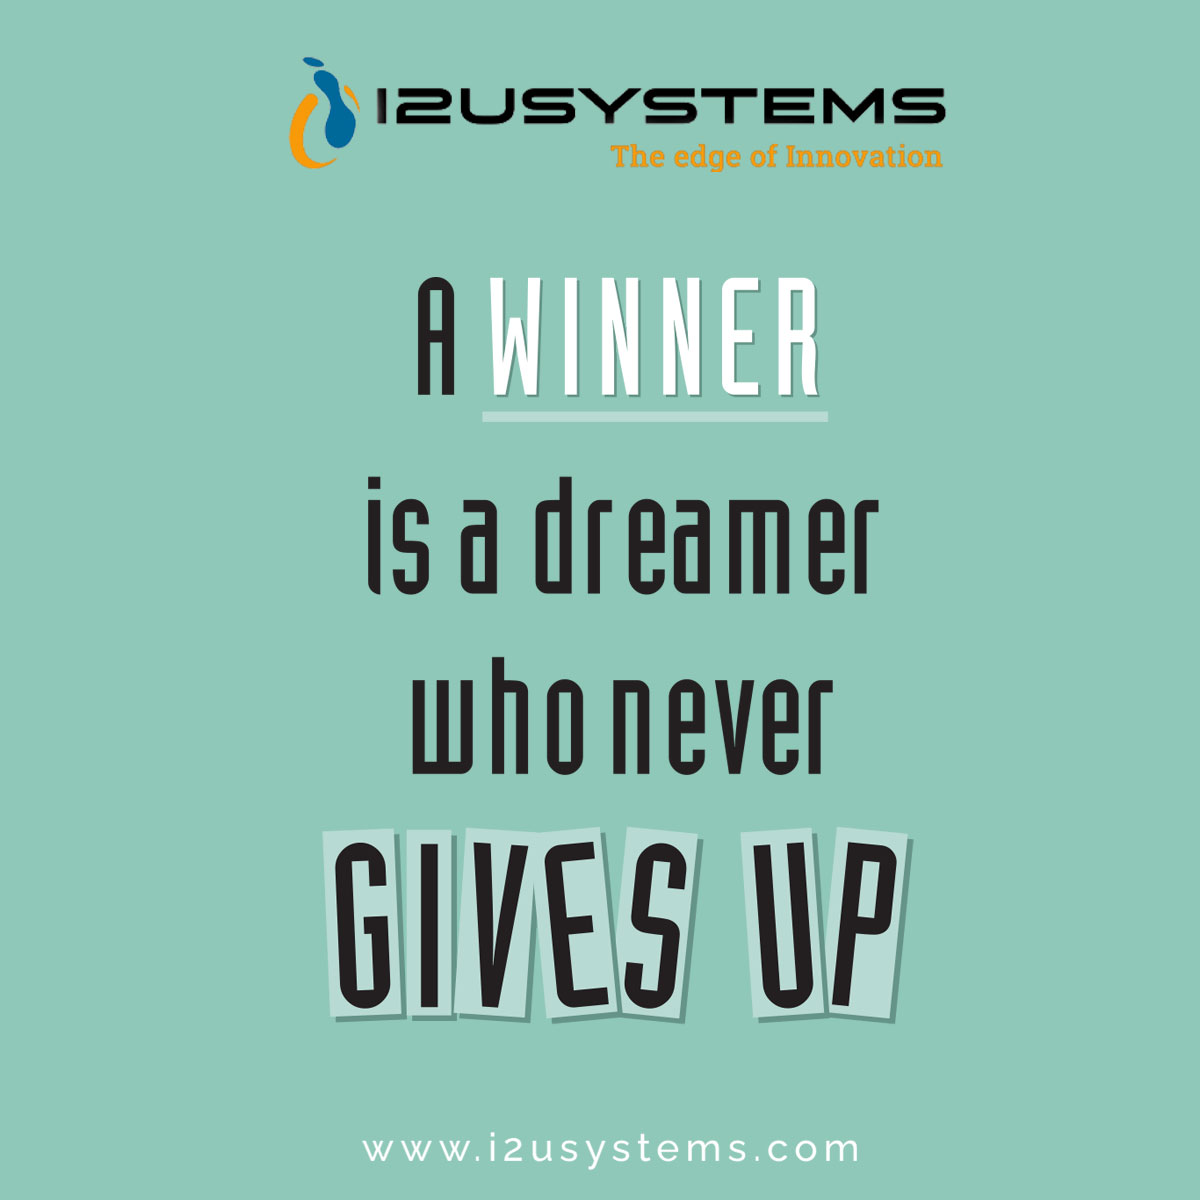 The harder you work the better you get #i2usystems #c2crequirements #w2jobs #directclient #directclients #i2u #i2usystemsinc #usaitjobs #usajobs #stategovernment #jobs #recruiters #benchsales #IOT #motivational #quote #harder #work #better